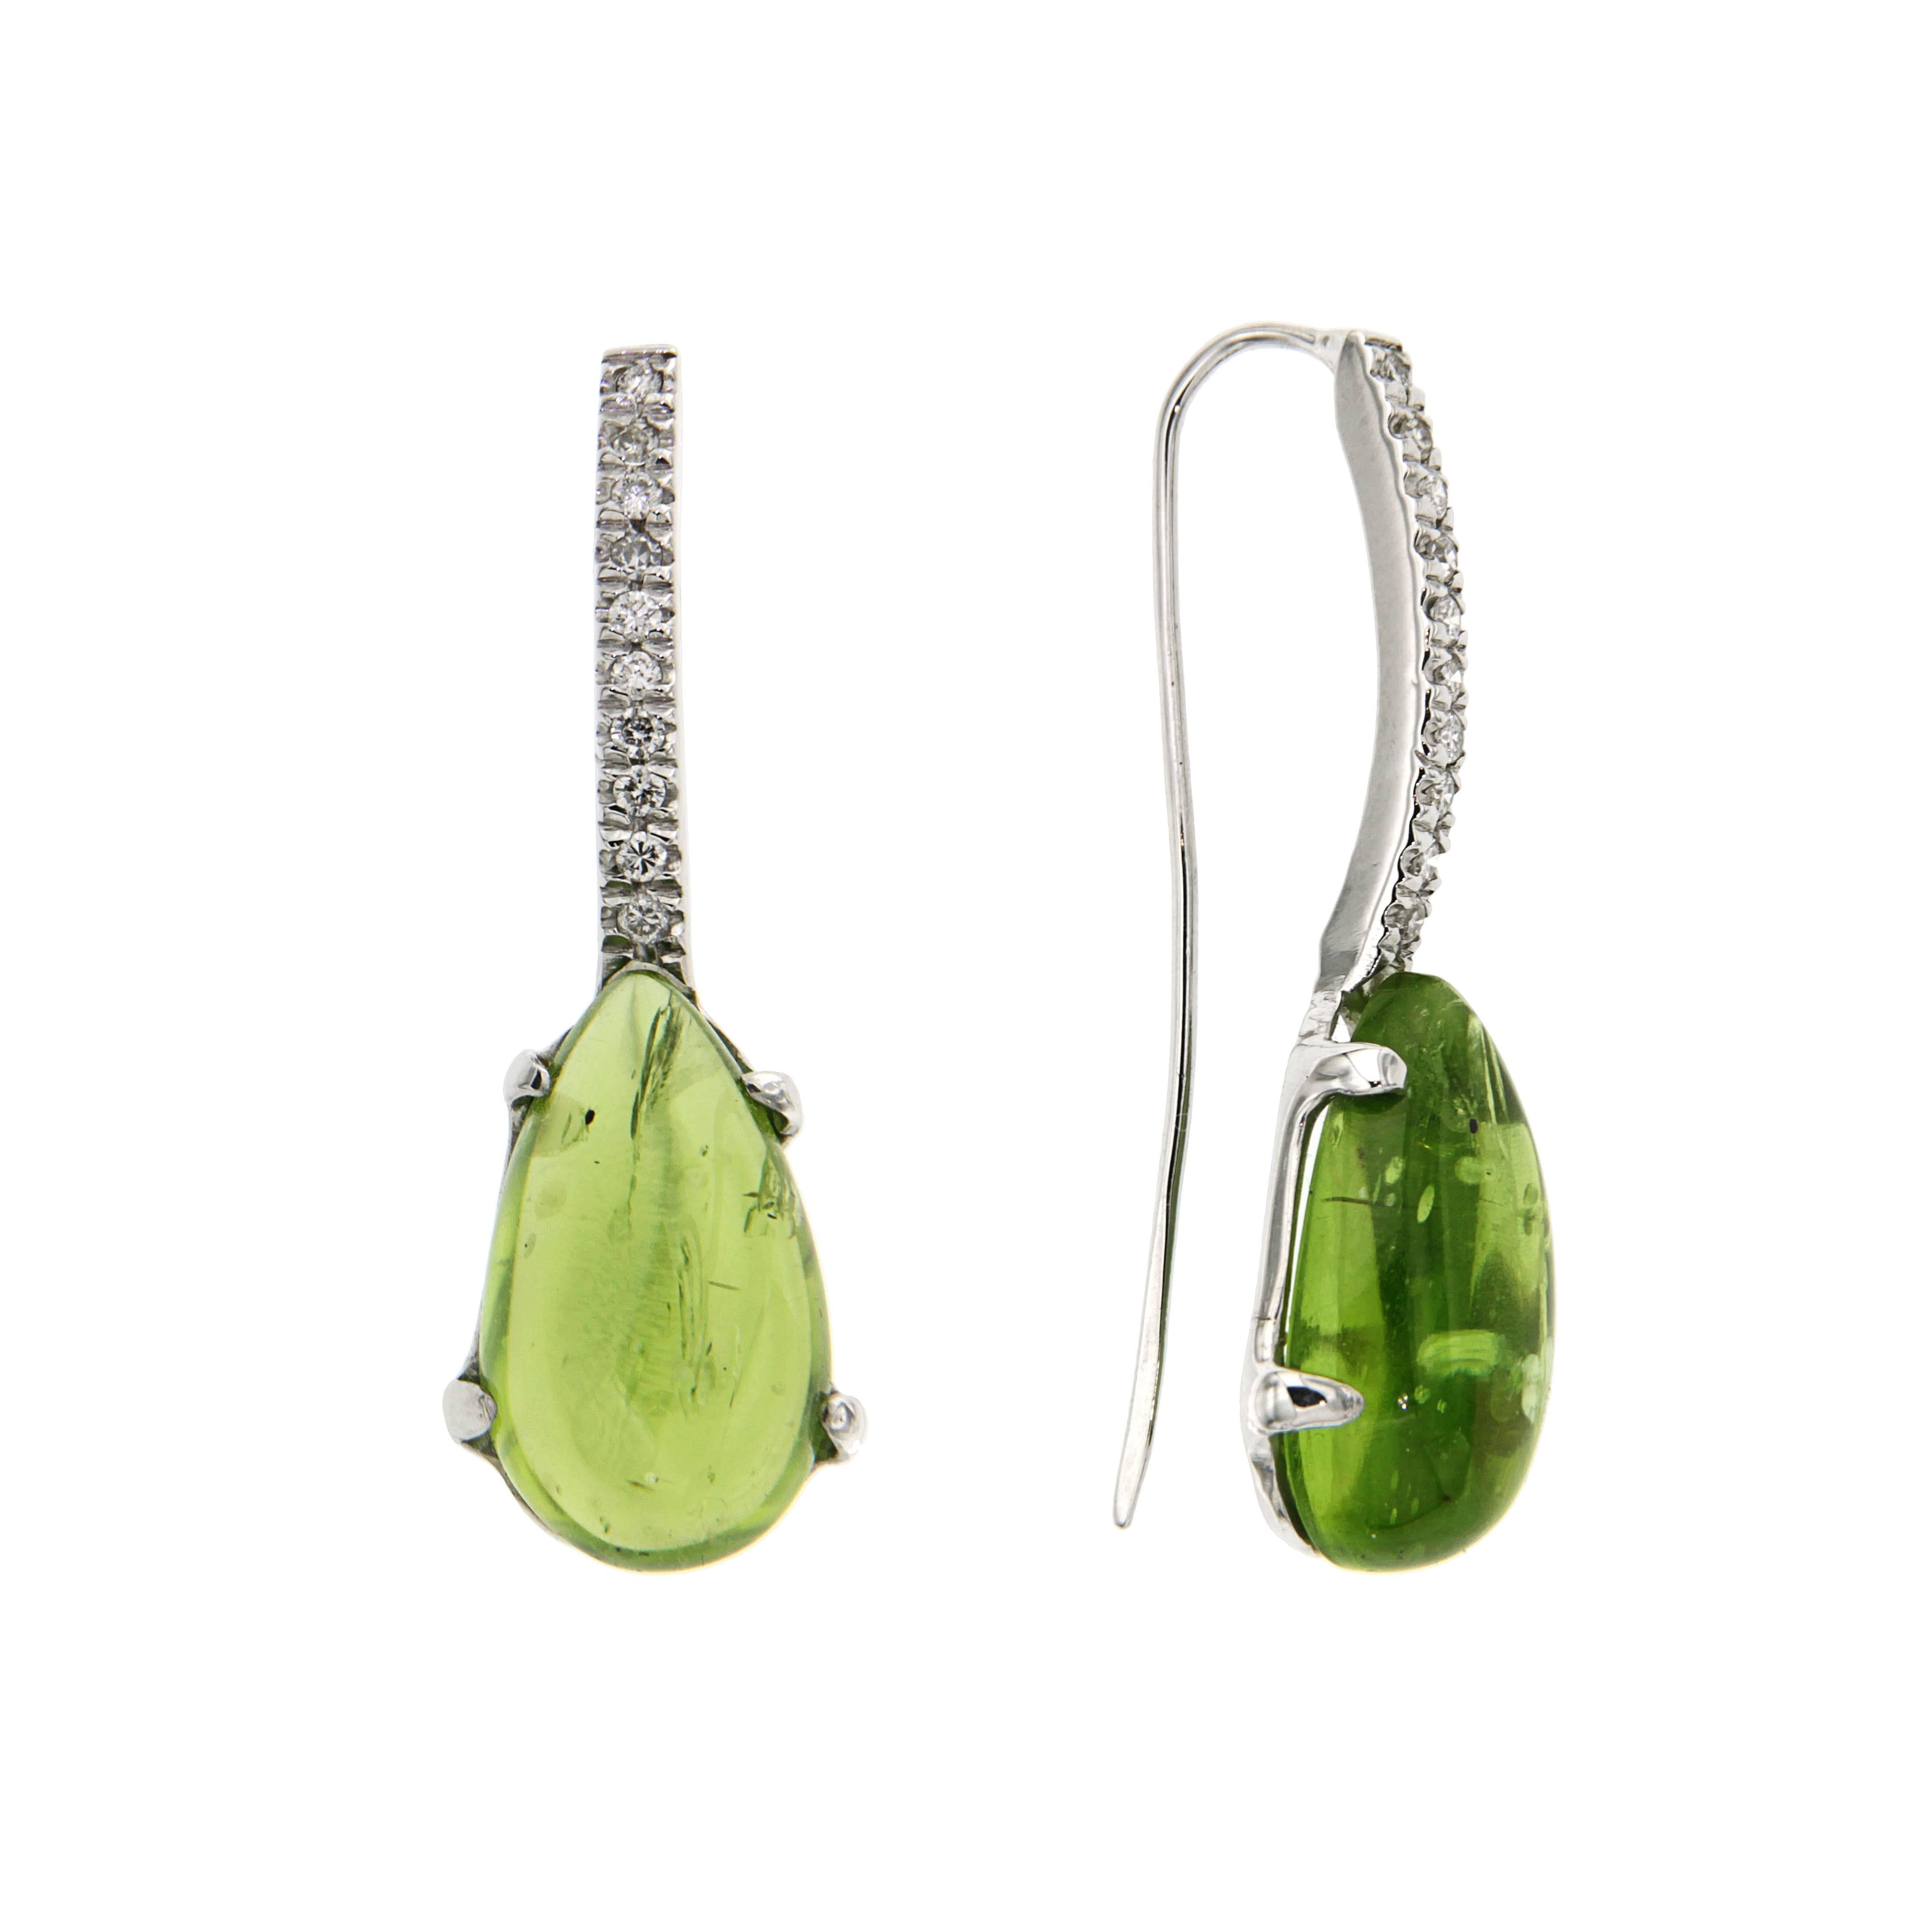 White 18k Gold Dangle Earrings with Diamonds 0.16 ctw and two Cabochon Peridot 22 ctw.
Handcrafted in Italy by Botta Gioielli. Peridot drop size is 11 x 19 millimeters / 0.433 x 0.748 inches. Total length of the earrings is 39 millimeters / 1.535